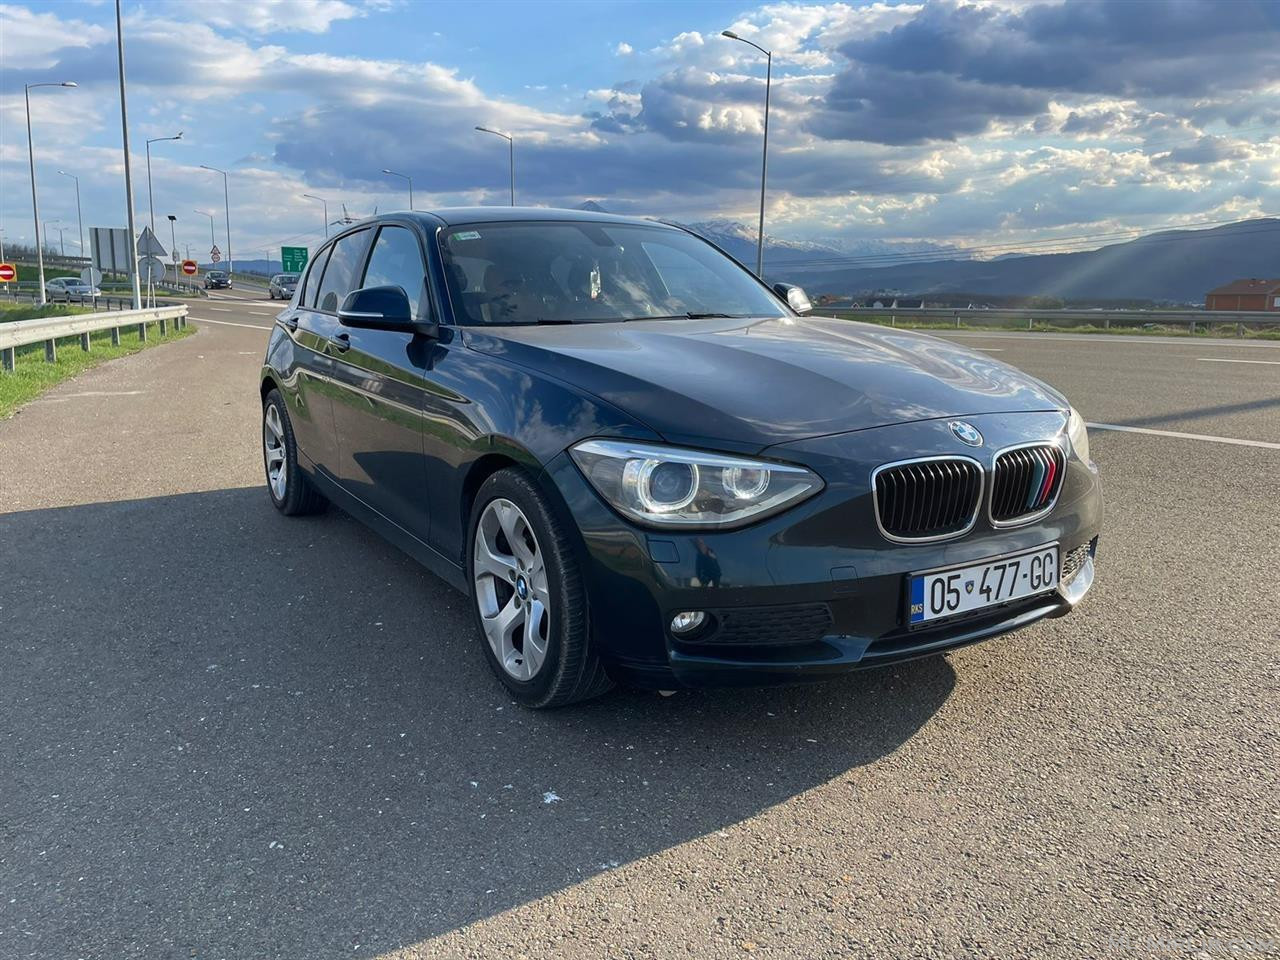 Shes bmw 118d 2.0